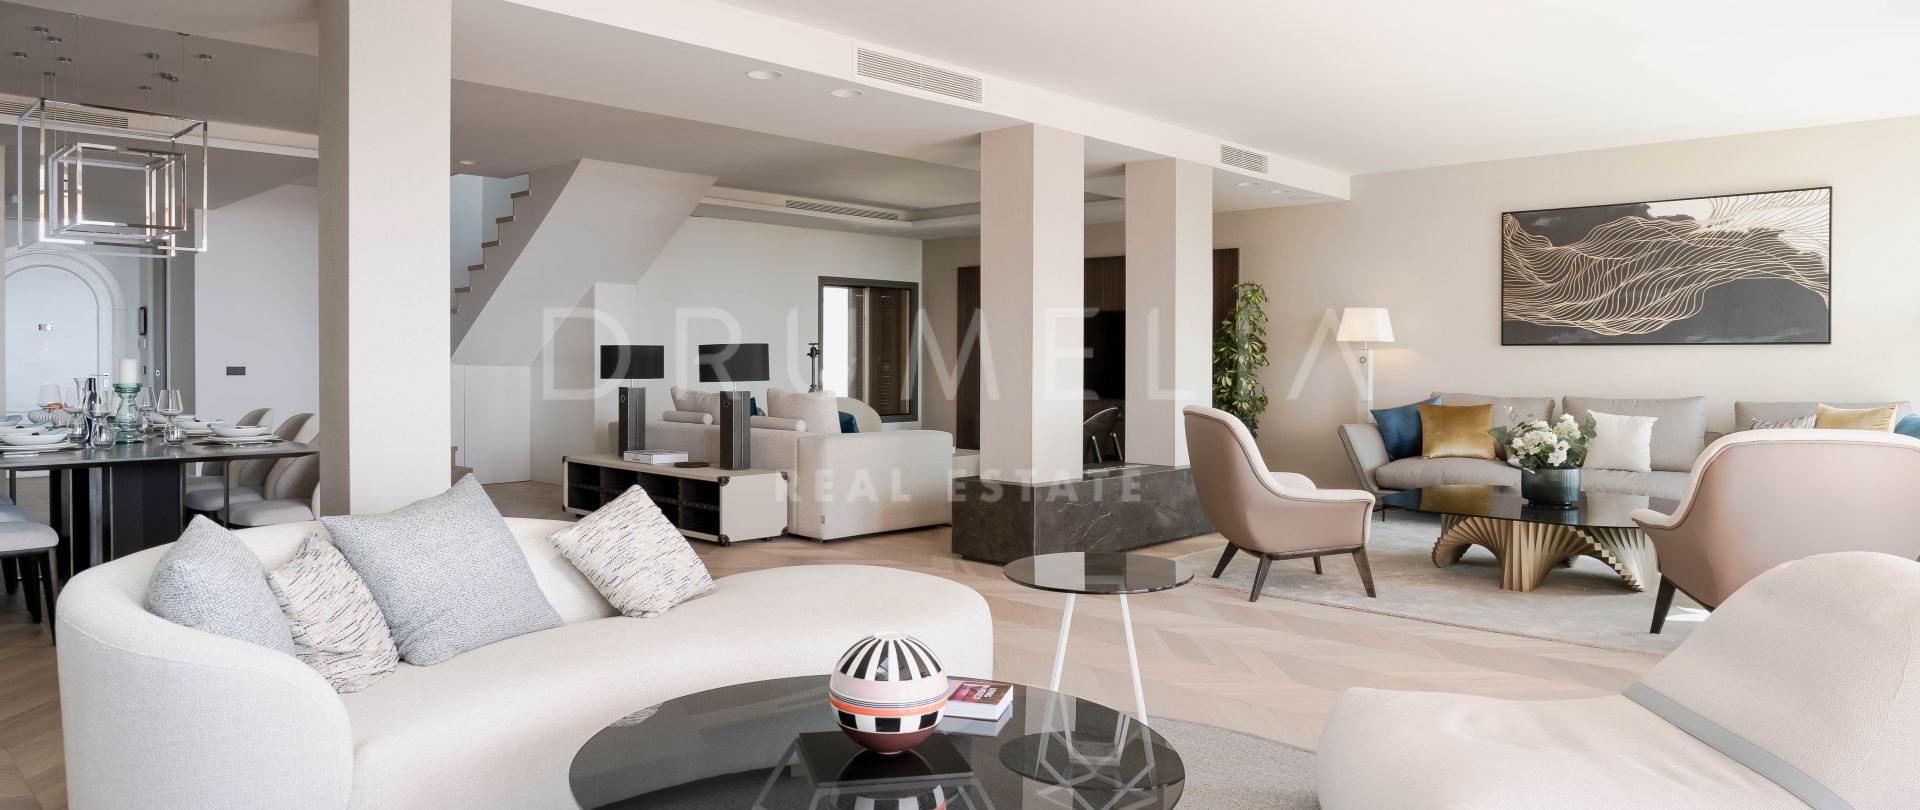 Stunning modern duplex penthouse with breath-taking sea views in Nueva Andalucía, Marbella